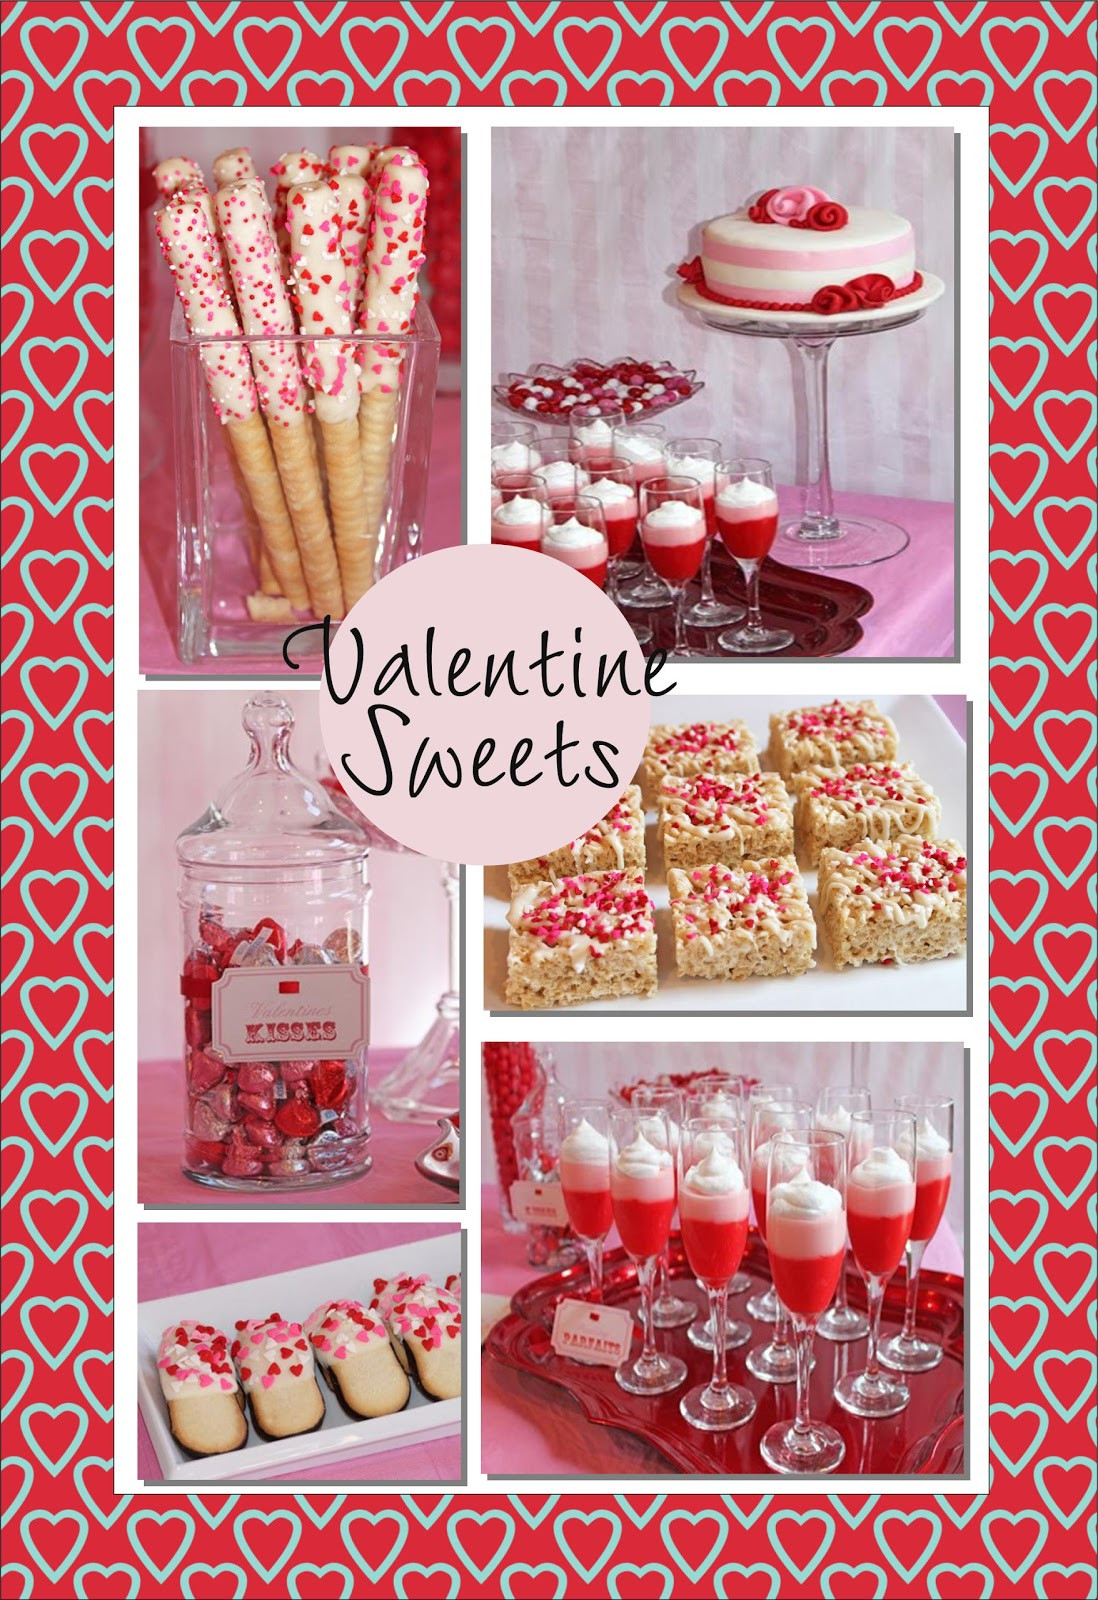 Valentines Day Party Foods
 It s Written on the Wall Valentine s Day Desserts and